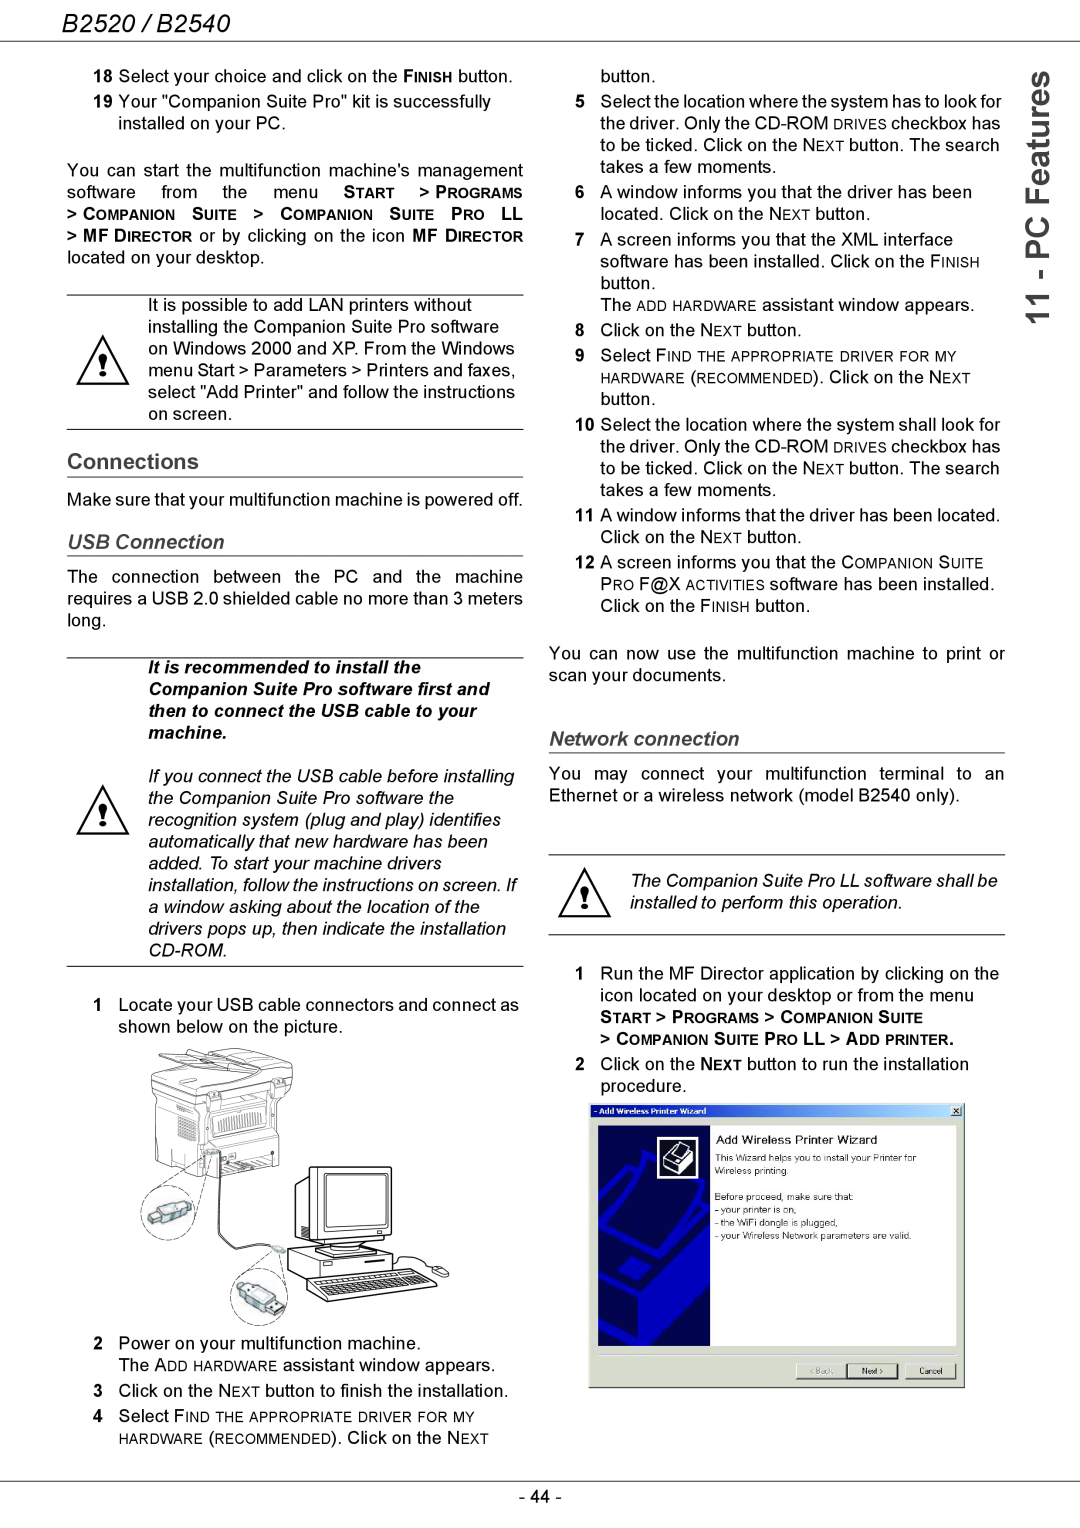 Oki B2500 Series manual Features, Connections, USB Connection, Network connection, B2520 / B2540 